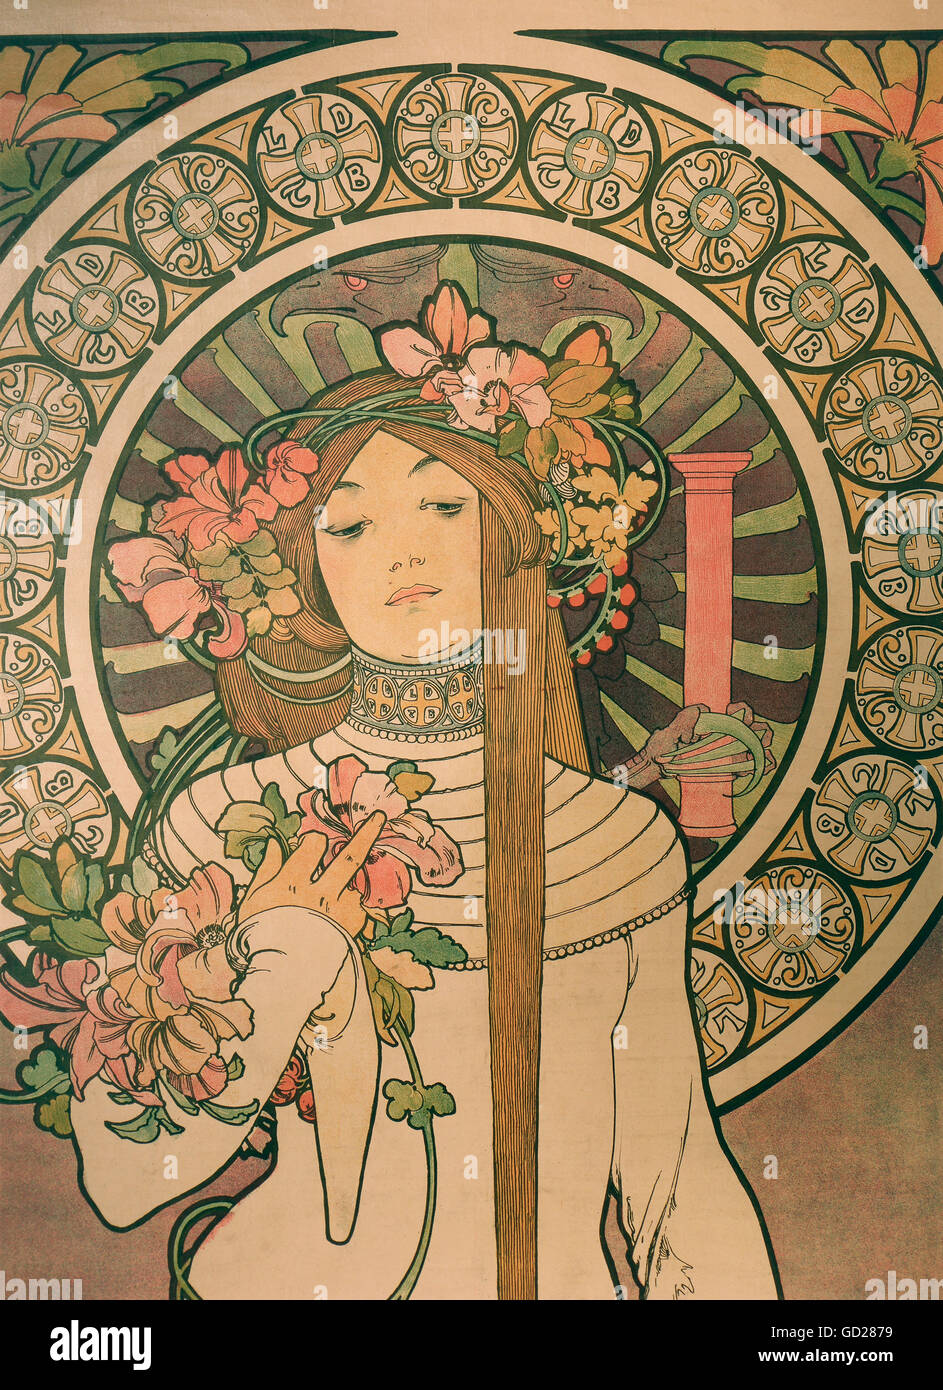 fine arts, Mucha, Alphonse (1860 - 1939), poster, advertising poster for 'La Trappistine' liqueur, colour lithograph, Paris, circa 1895, Die Neue Sammlung (The New Collection), Munich, detail, Artist's Copyright has not to be cleared Stock Photo